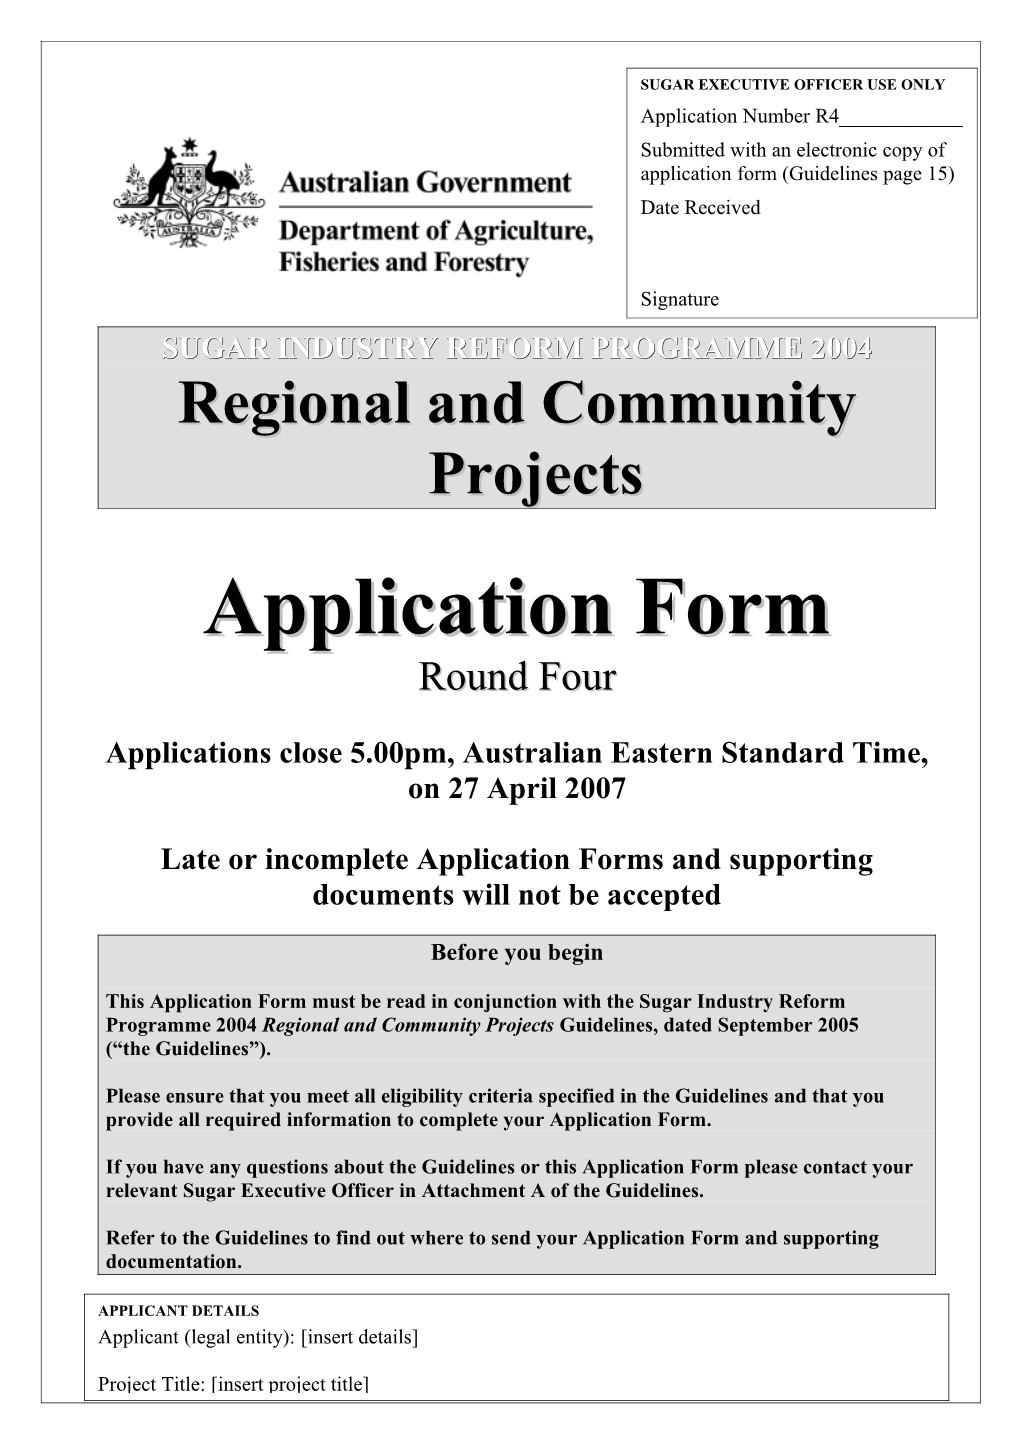 Application Form for Regional and Community Projects March 2007